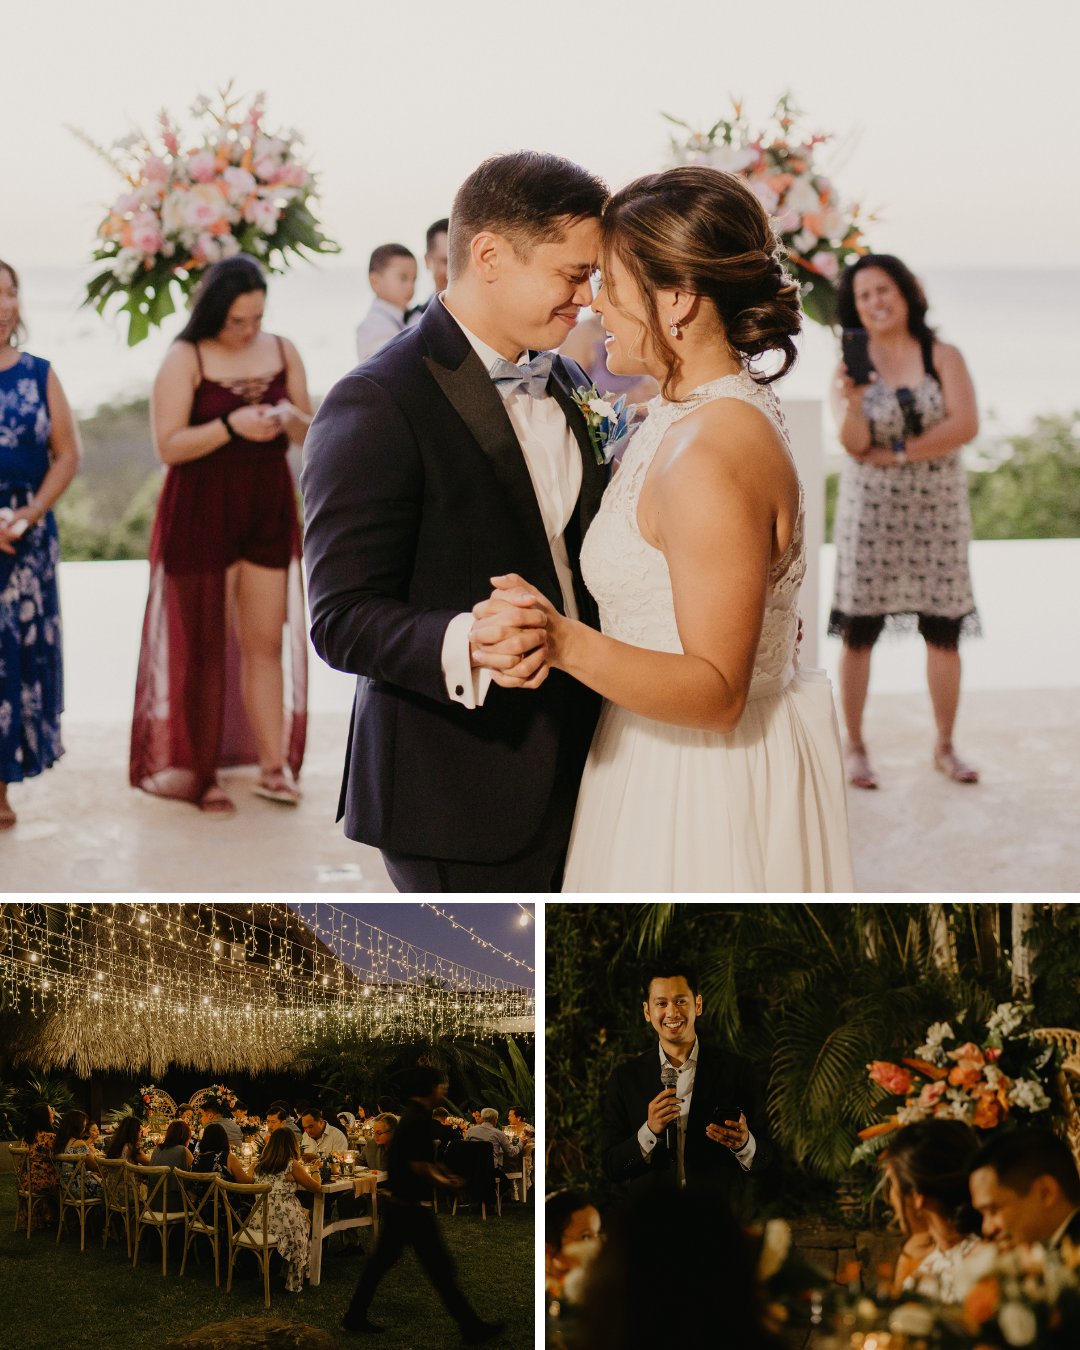 Three-photo collage: Top: A couple dances at their wedding, surrounded by guests and floral arrangements. Middle: Guests seated at an elegantly decorated outdoor dinner under string lights. Bottom: A man in a navy suit addresses the gathering with a microphone.